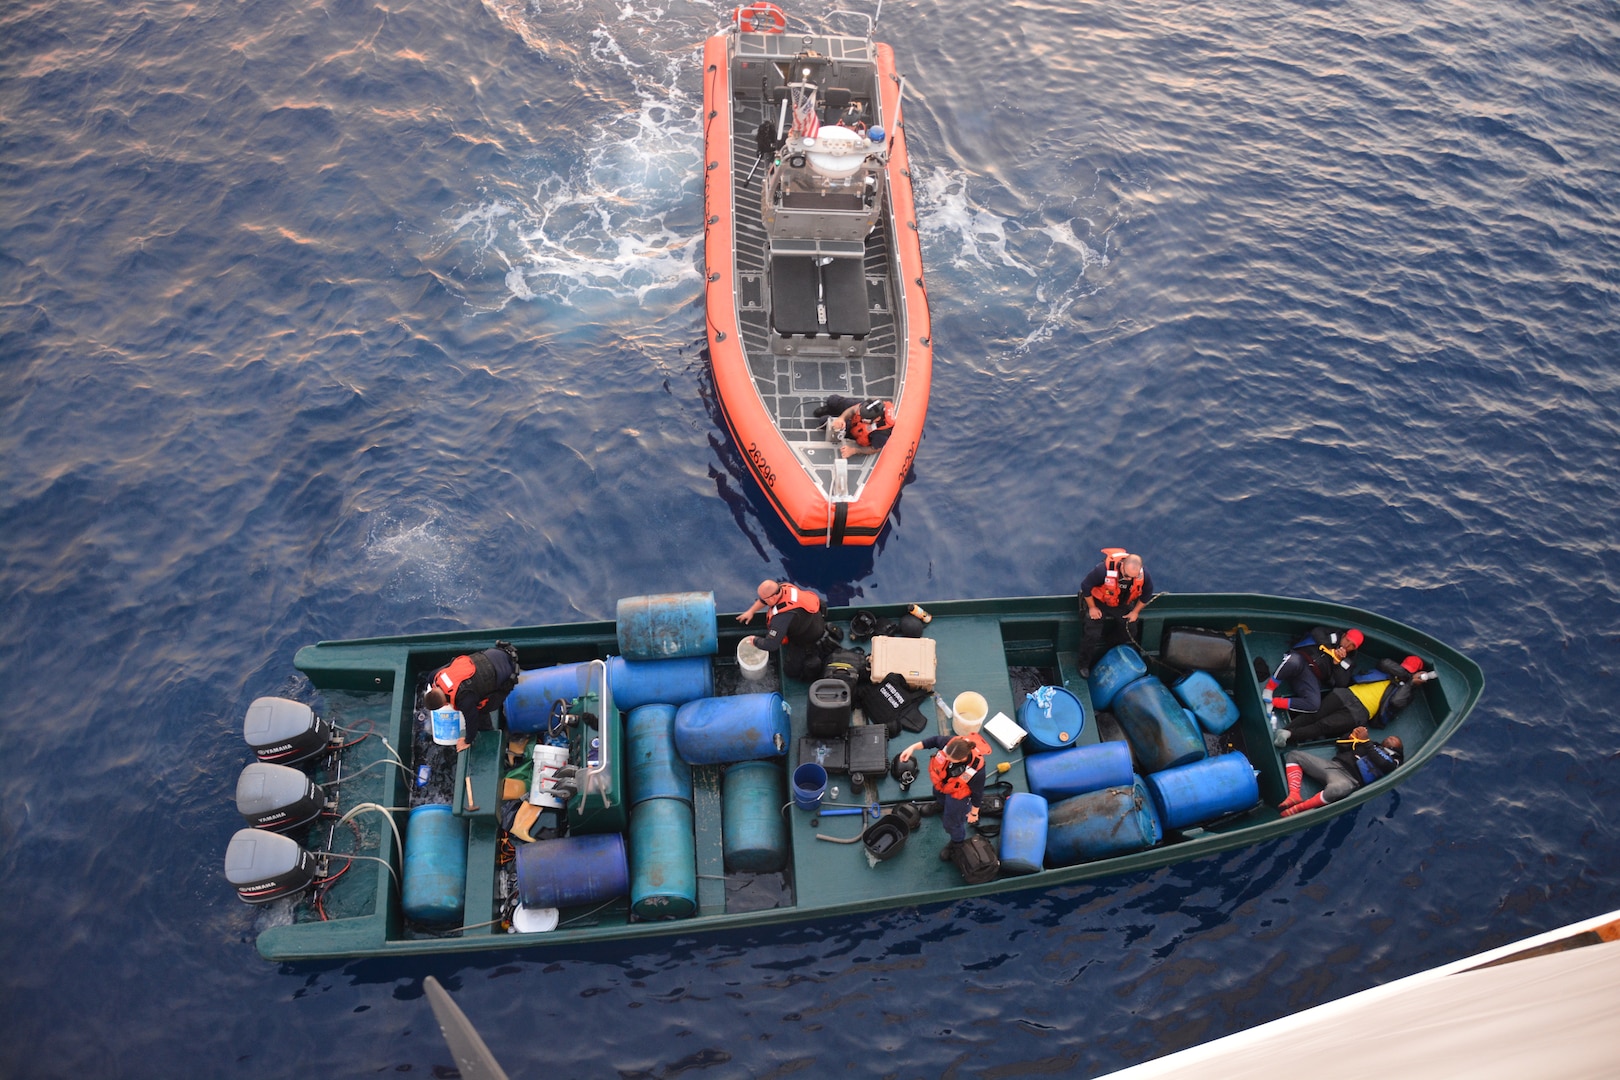 The Coast Guard Cutter Alert (WMEC 630) boarding Team uses buckets to scoop water out of go-fast vessel after the suspected drug smugglers attempted to scuttle the vessel in the Eastern Pacific Ocean May 26, 2023. The Coast Guard Cutter Alert crews actions and damage control skills prevented loss of evidence. (U.S. Coast Guard photo by Ens. Samuel Severson)